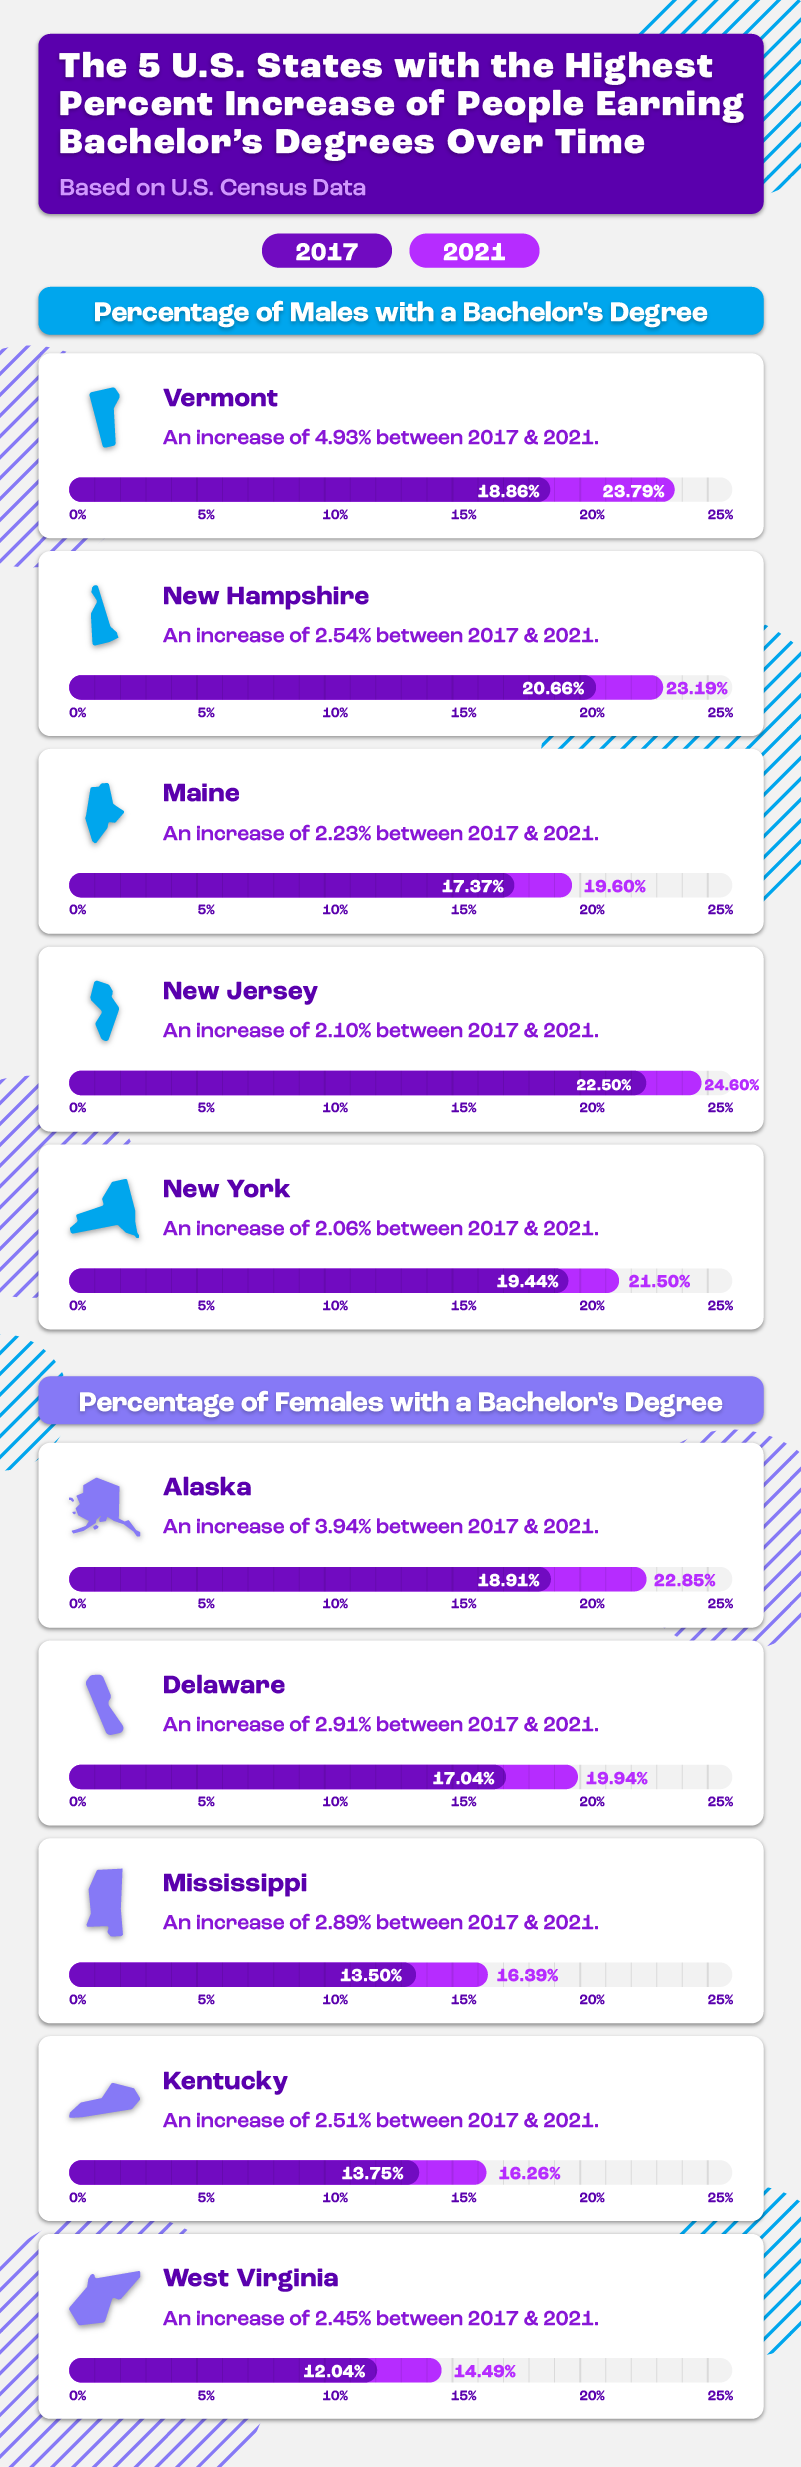 Infographic displaying the top 5 U.S. states with the largest increase in bachelor’s degrees for males and females